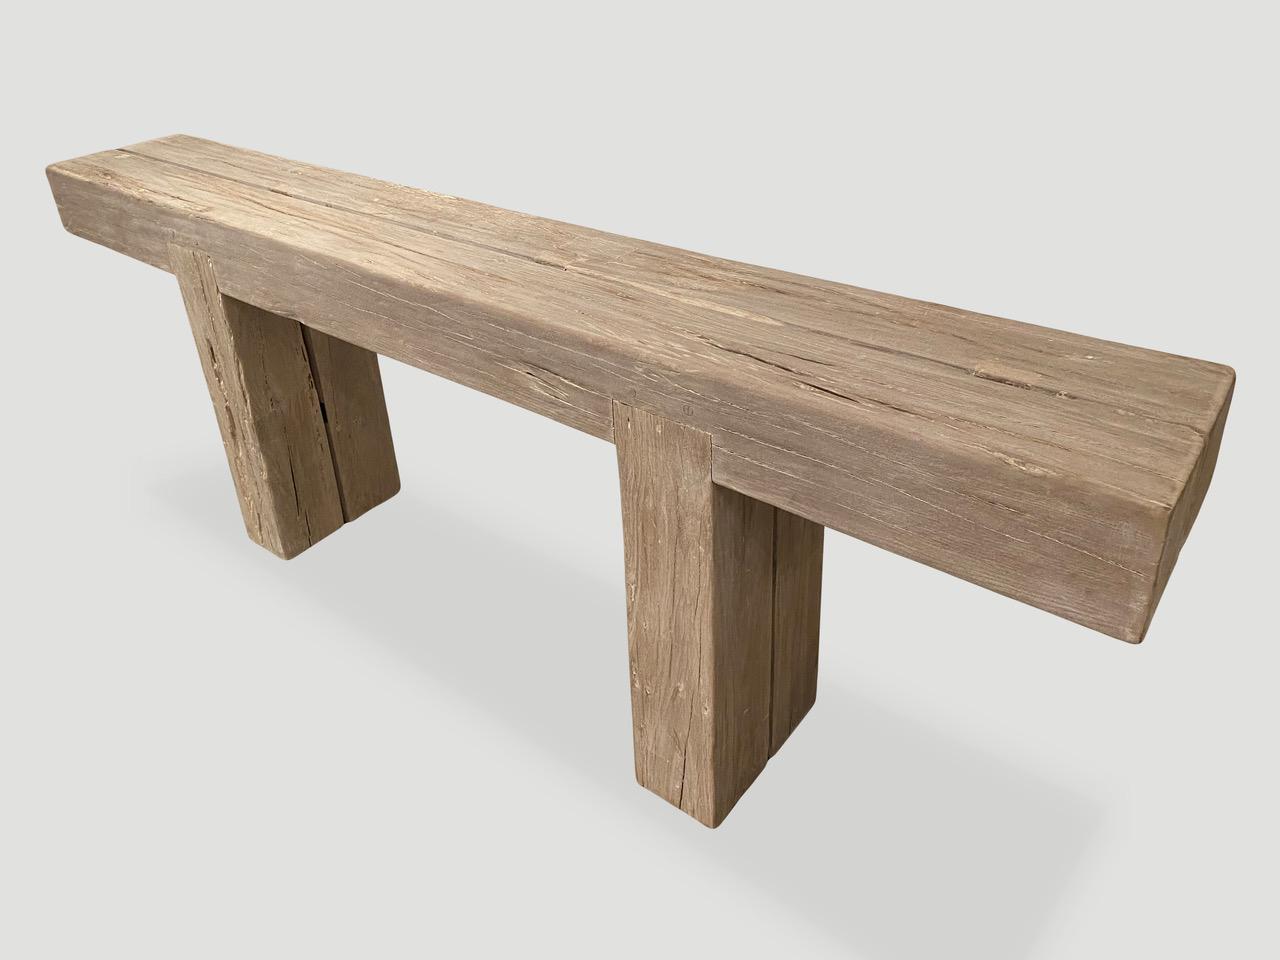 Andrianna Shamaris Teak Wood Log Console Table In Excellent Condition For Sale In New York, NY